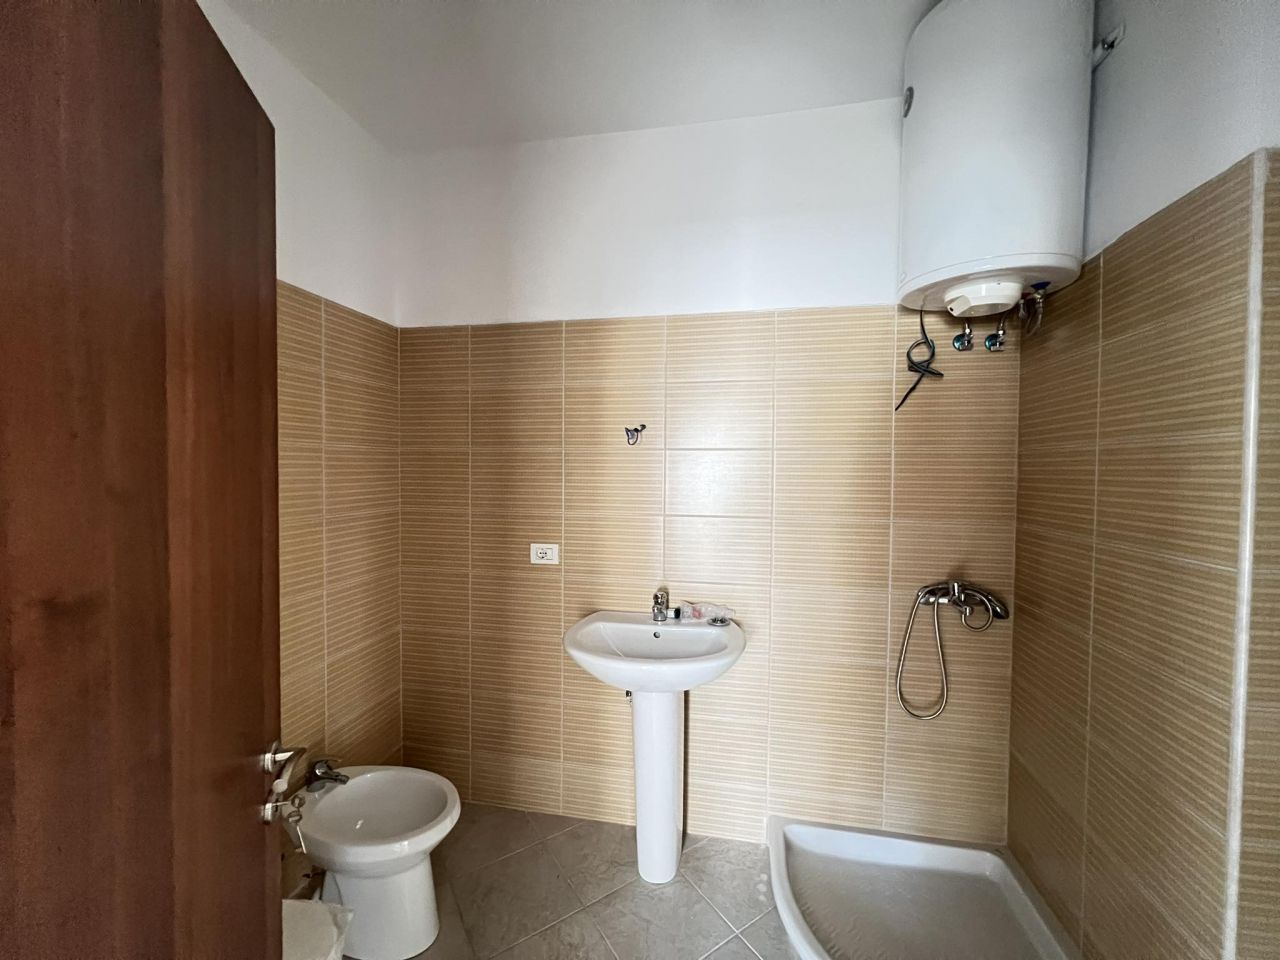 Two Bedroom Two Bathrooms Apartment For Sale In Saranda Albania In Short Distance From The Sea Built in Good Quality